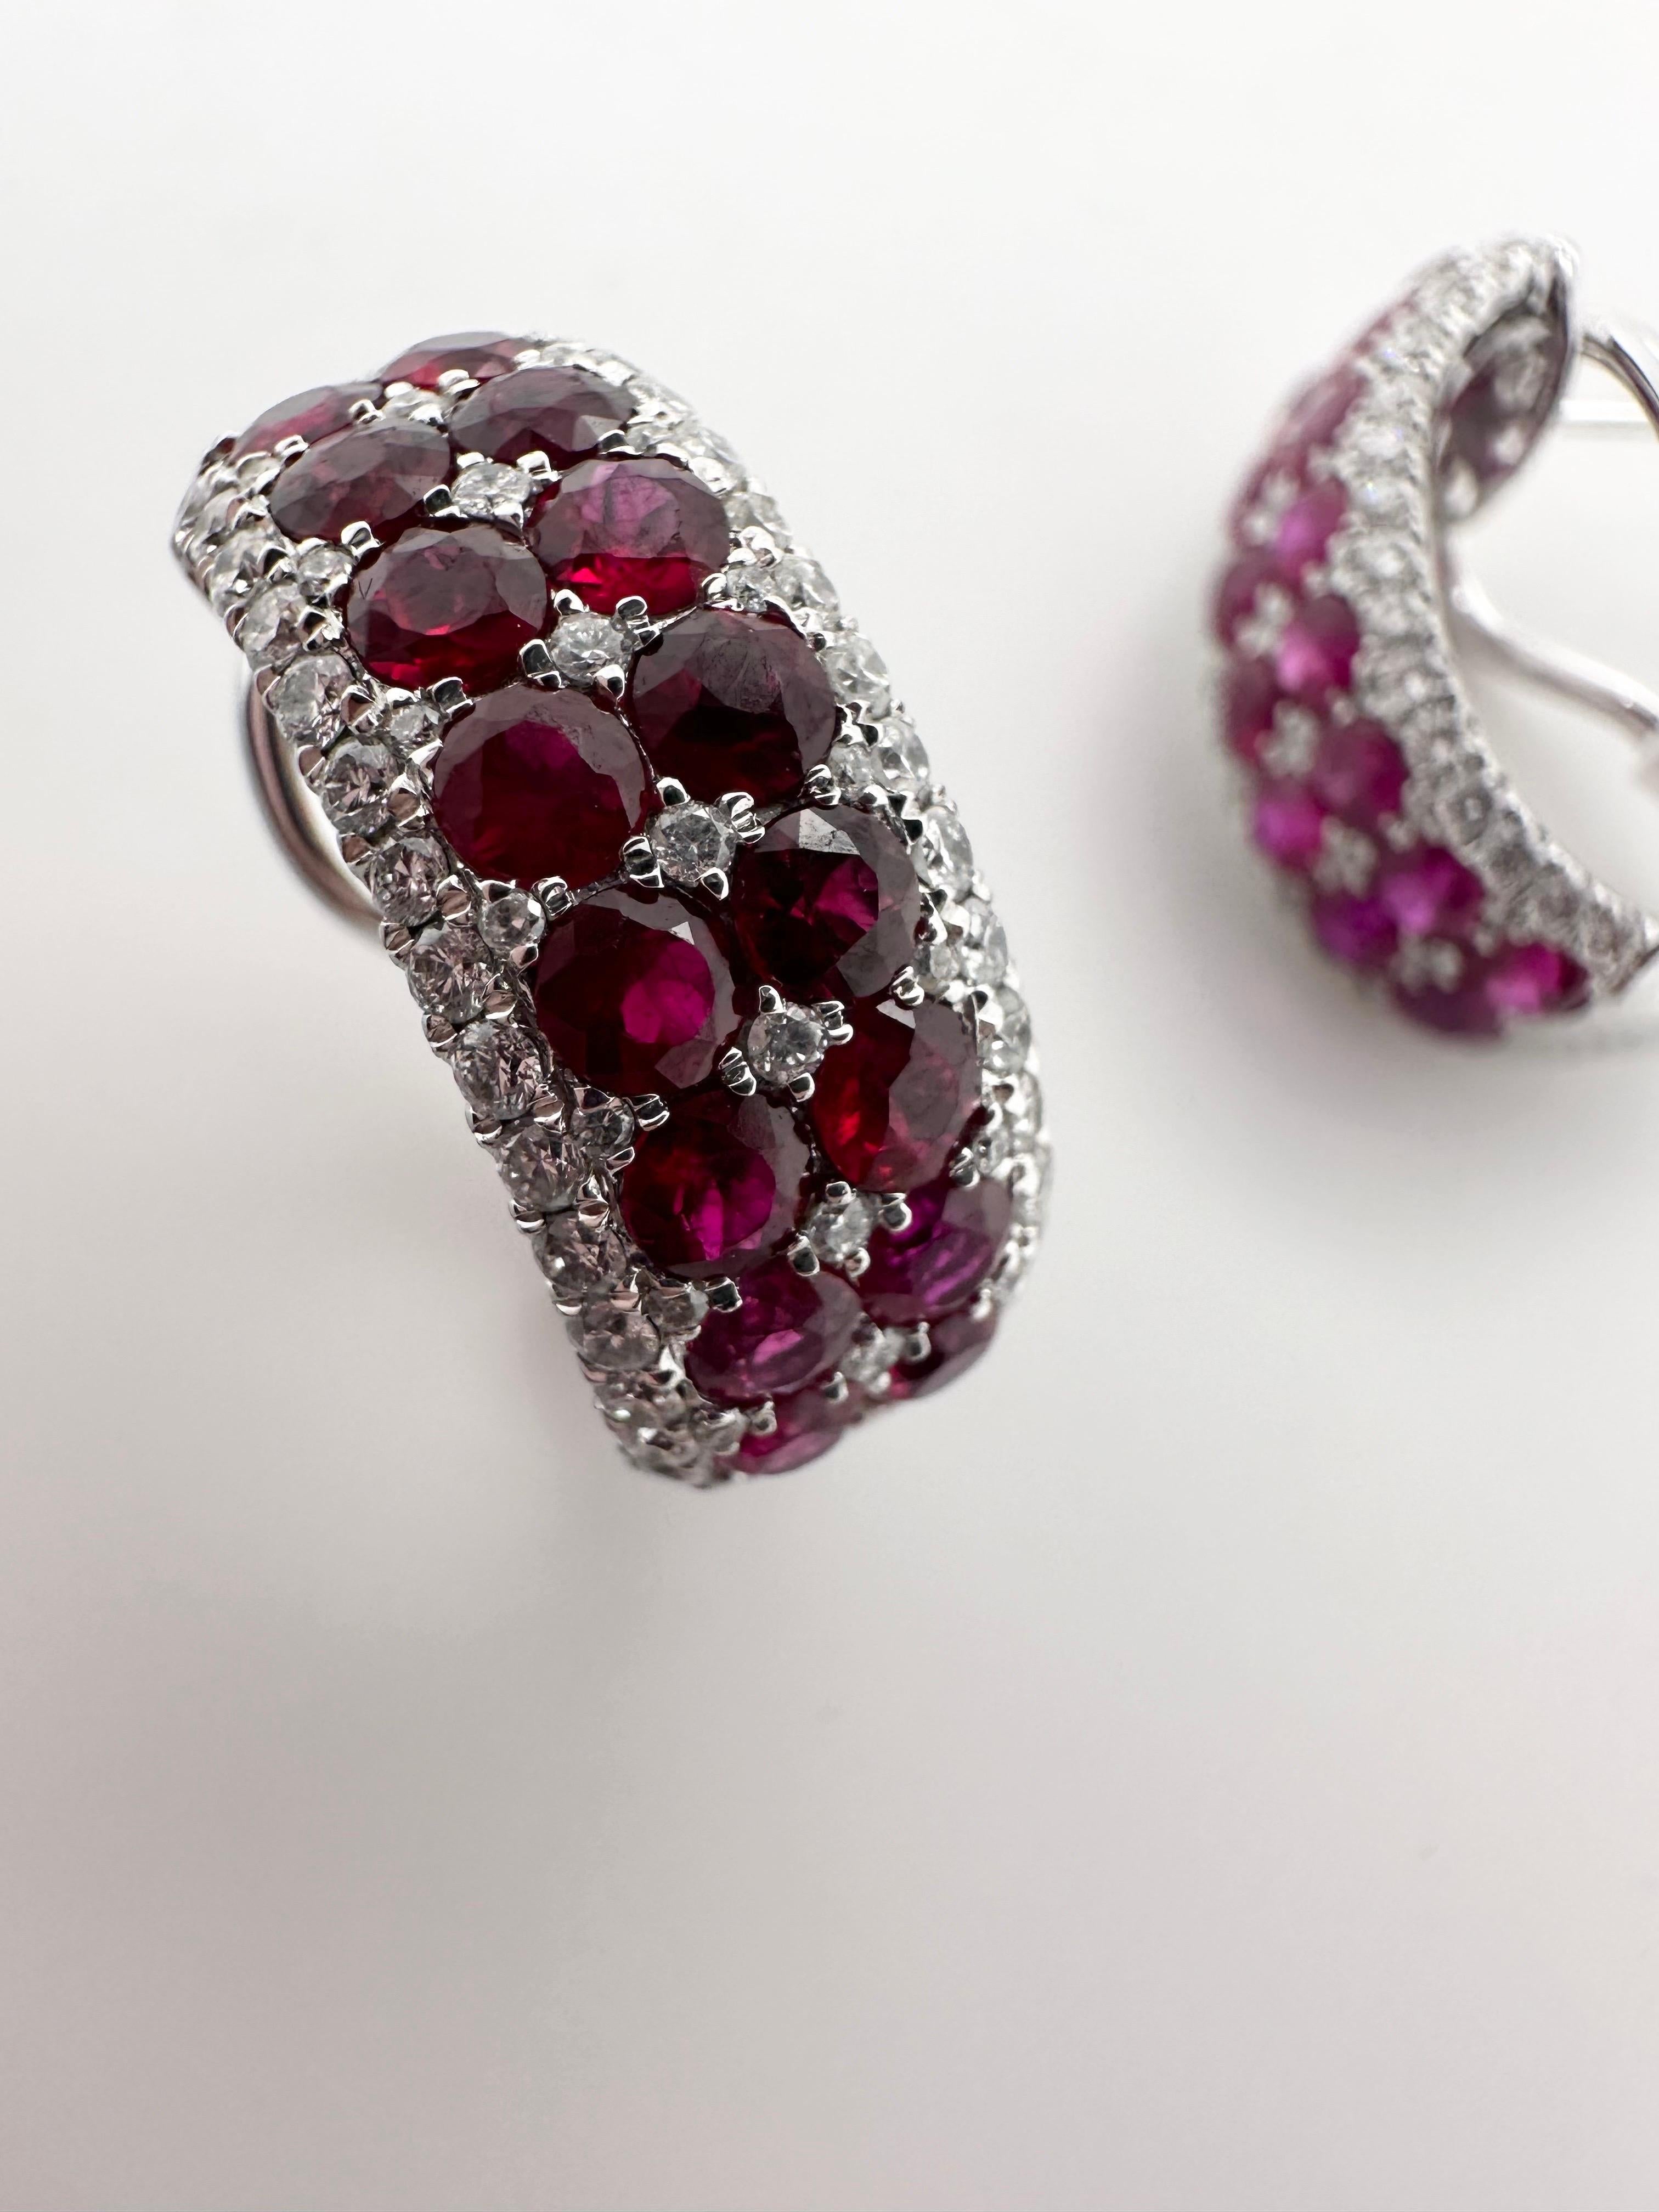 Stunning ruby and diamonds earrings! The rubies are a desired wine color with a touch of pink hue, the diamonds are VS clarity and F color totalling 0.74 carats. Earrings are luxurious when on ears and very comfortable made in 18KT white